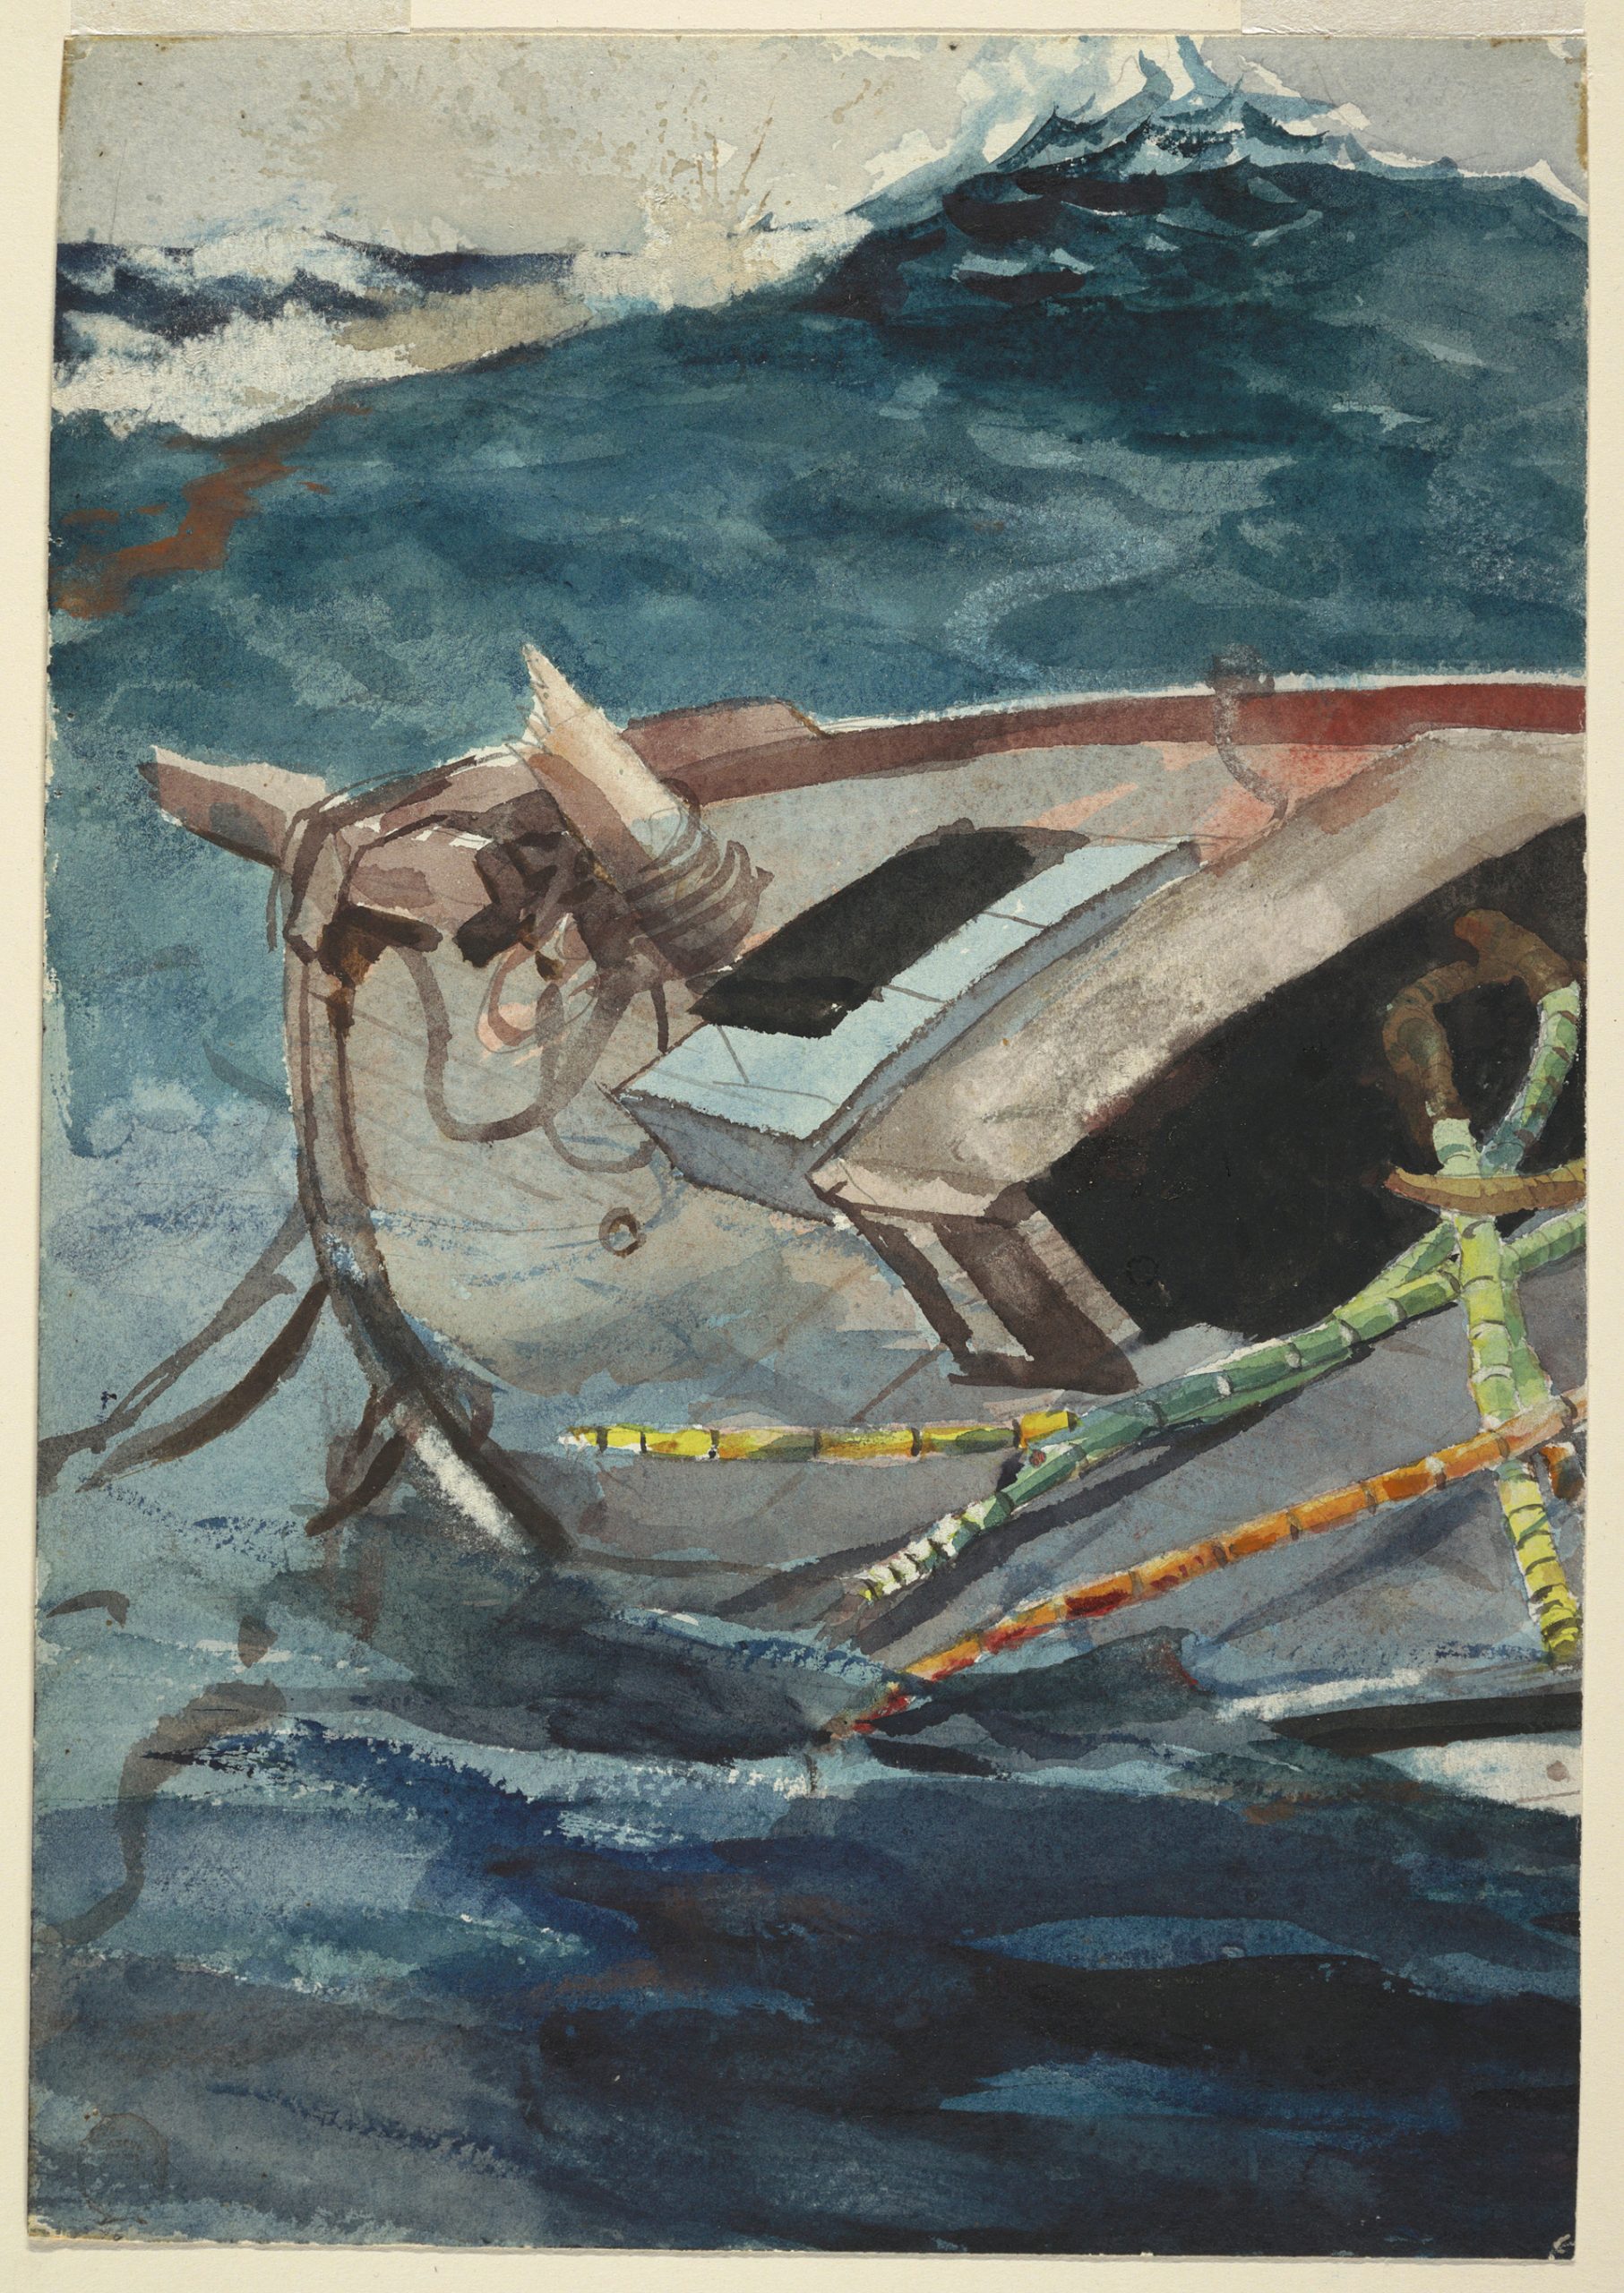 Winslow Homer Study for The Gulf Stream, 1898-99, Brush and watercolour black chalk on paper, 36.8 x 25.6 cm, Cooper-Hewitt, National Design Museum, Smithsonian Institution TBC
Gift of Charles Savage Homer, Jr. 1912-12-36
© Cooper-Hewitt, National Design Museum, Smithsonian Institution TBC